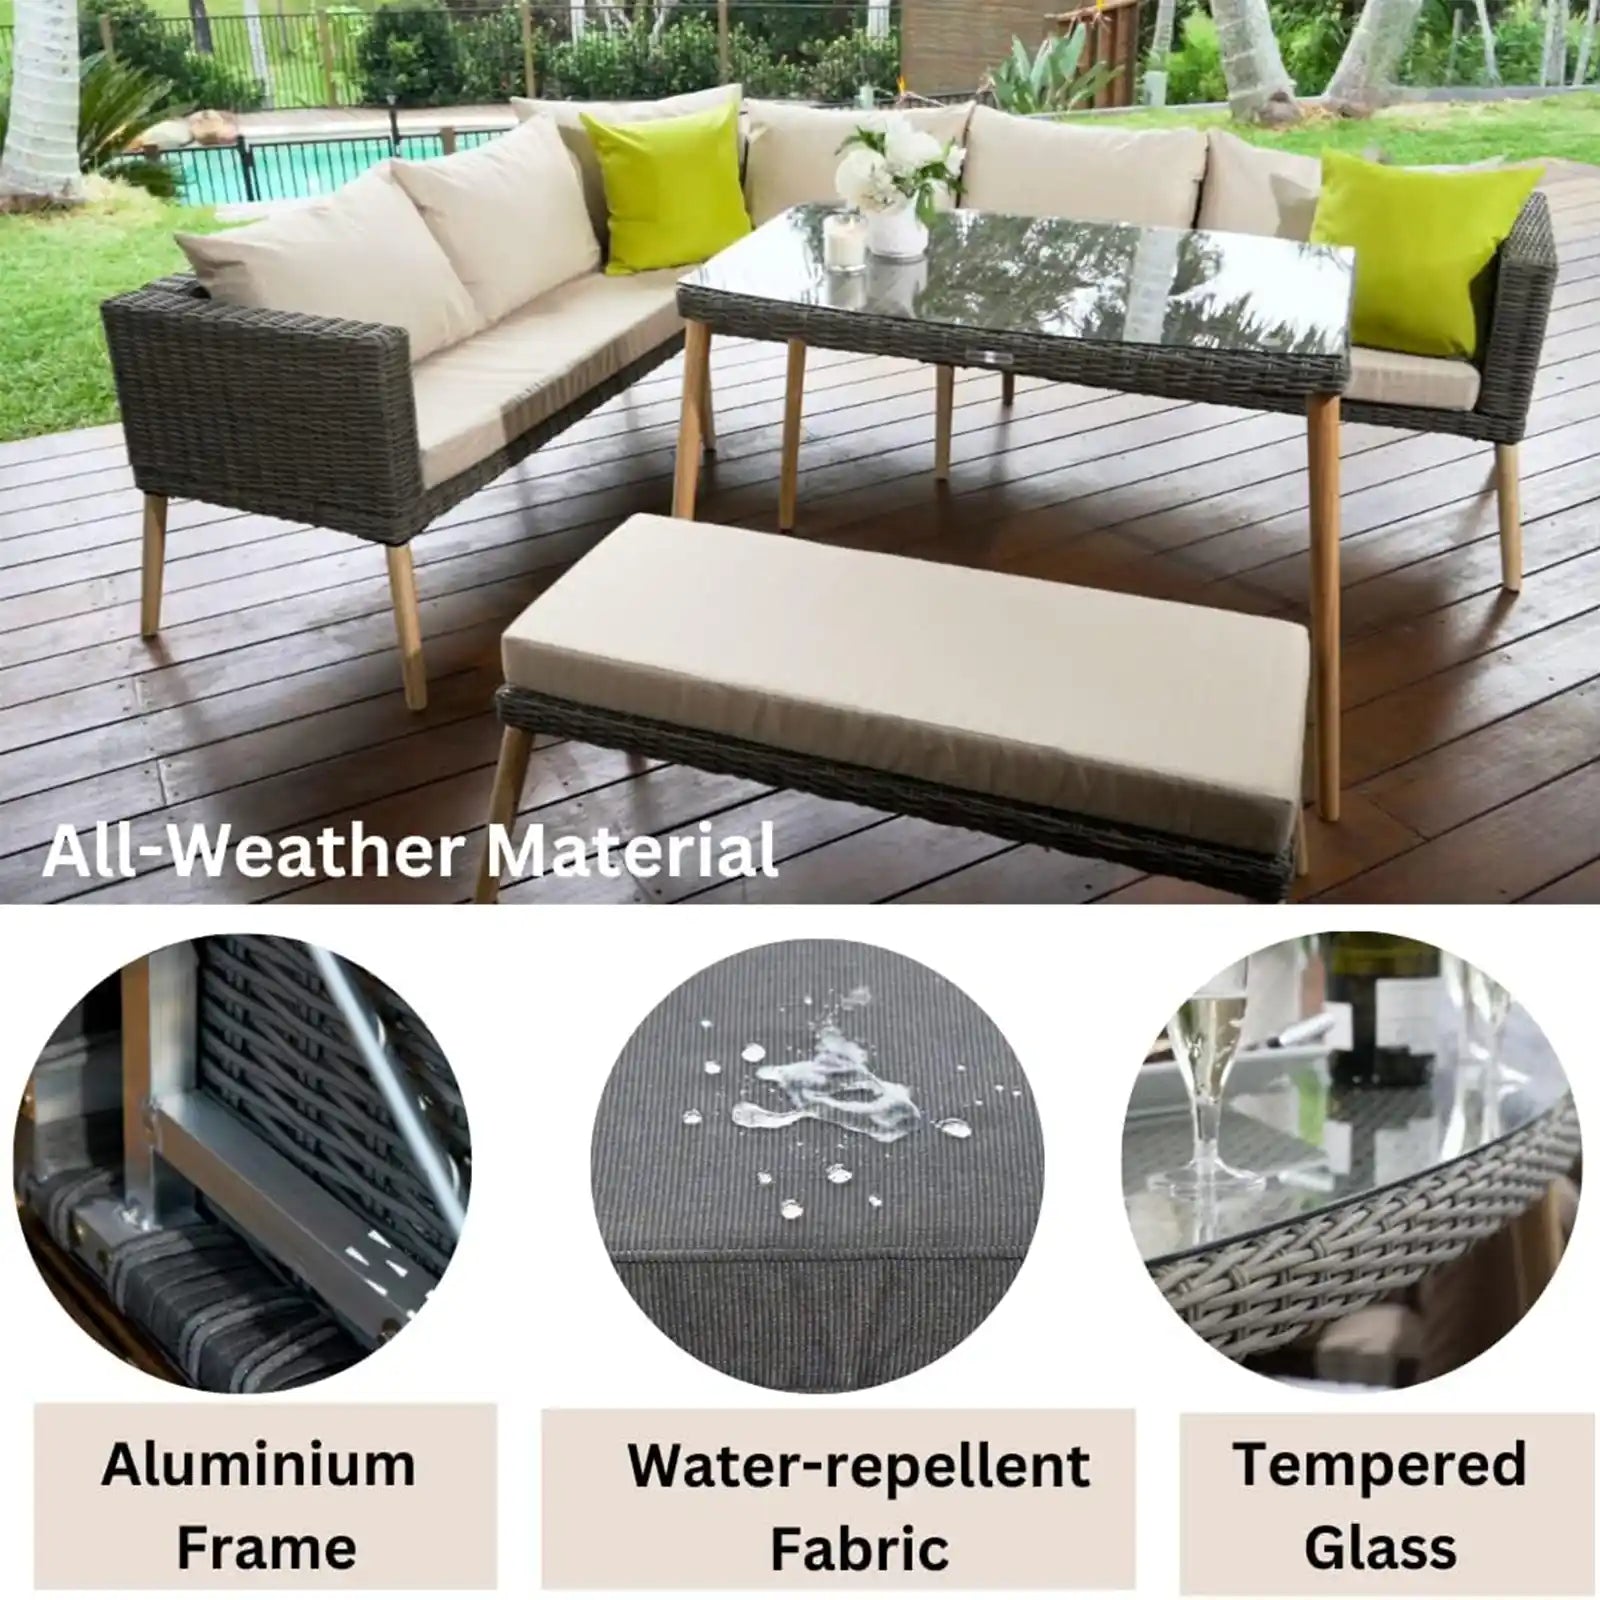 Outdoor Sectional with Dining Table, Patio Furniture Set, Tempered Glass Table Top, Rattan Outdoors Conversation Sets for Balcony, Garden Lawn, Sunroom, Modern Wicker Porch Sofa Table